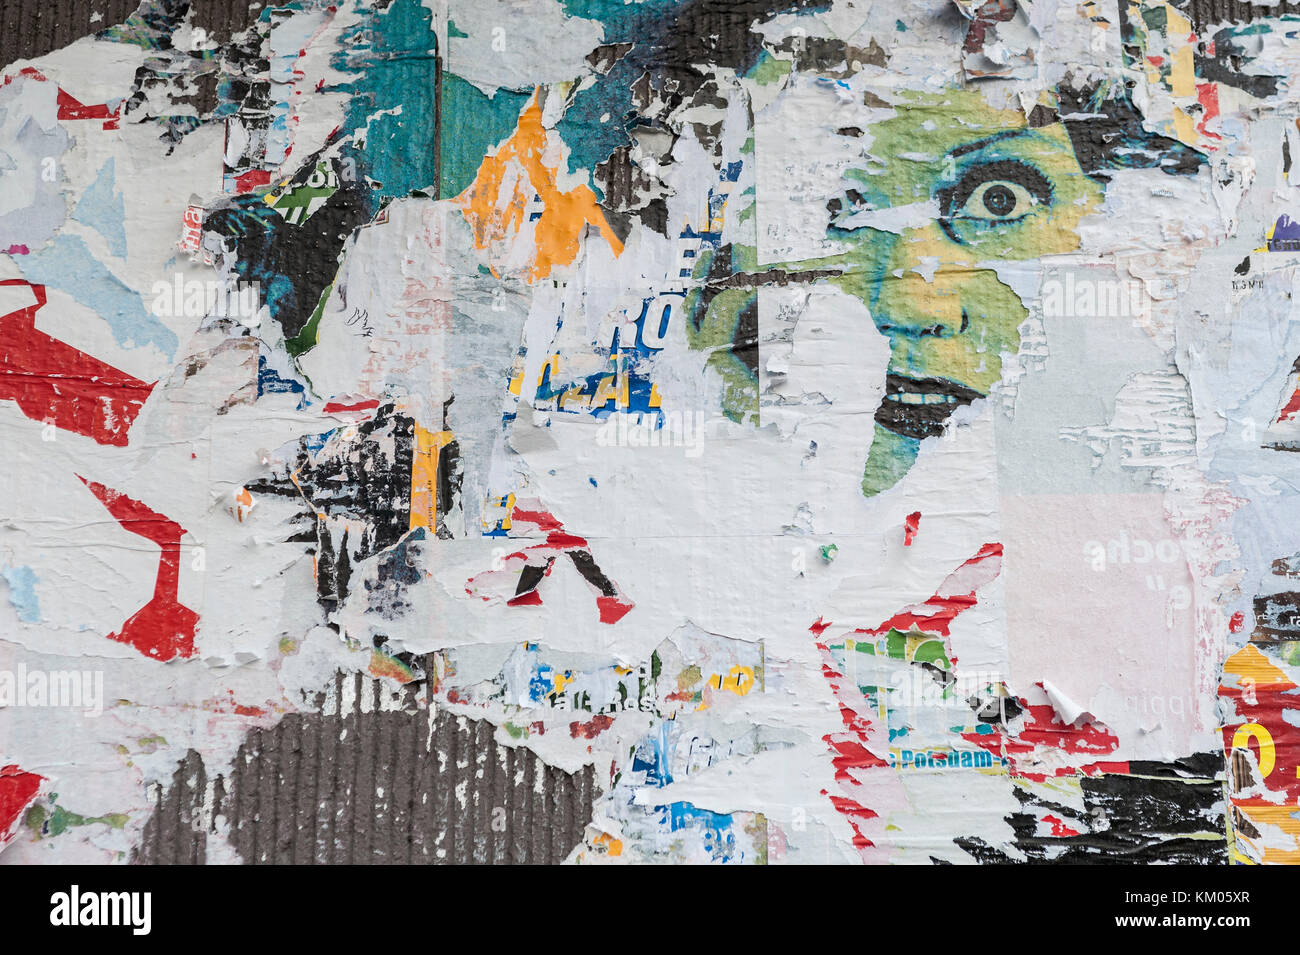 Wall full of Scraped posters, a printed female face is partial visible. Stock Photo